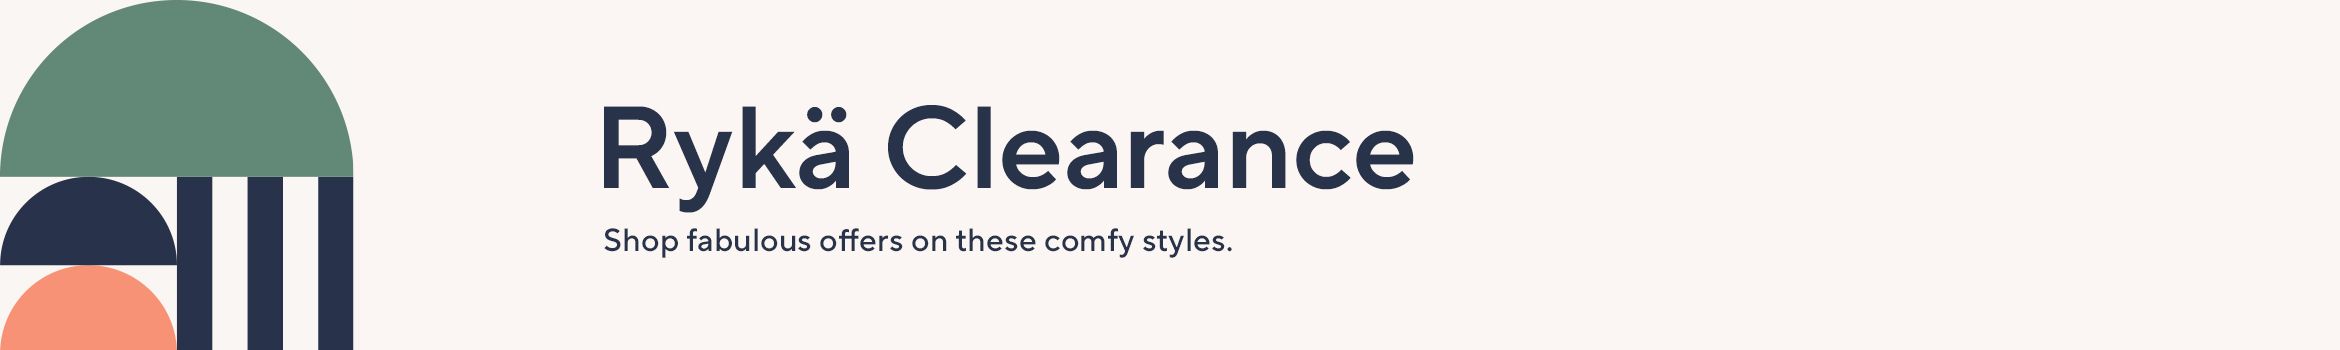 Rykä Clearance: Shop fabulous offers on these comfy styles.